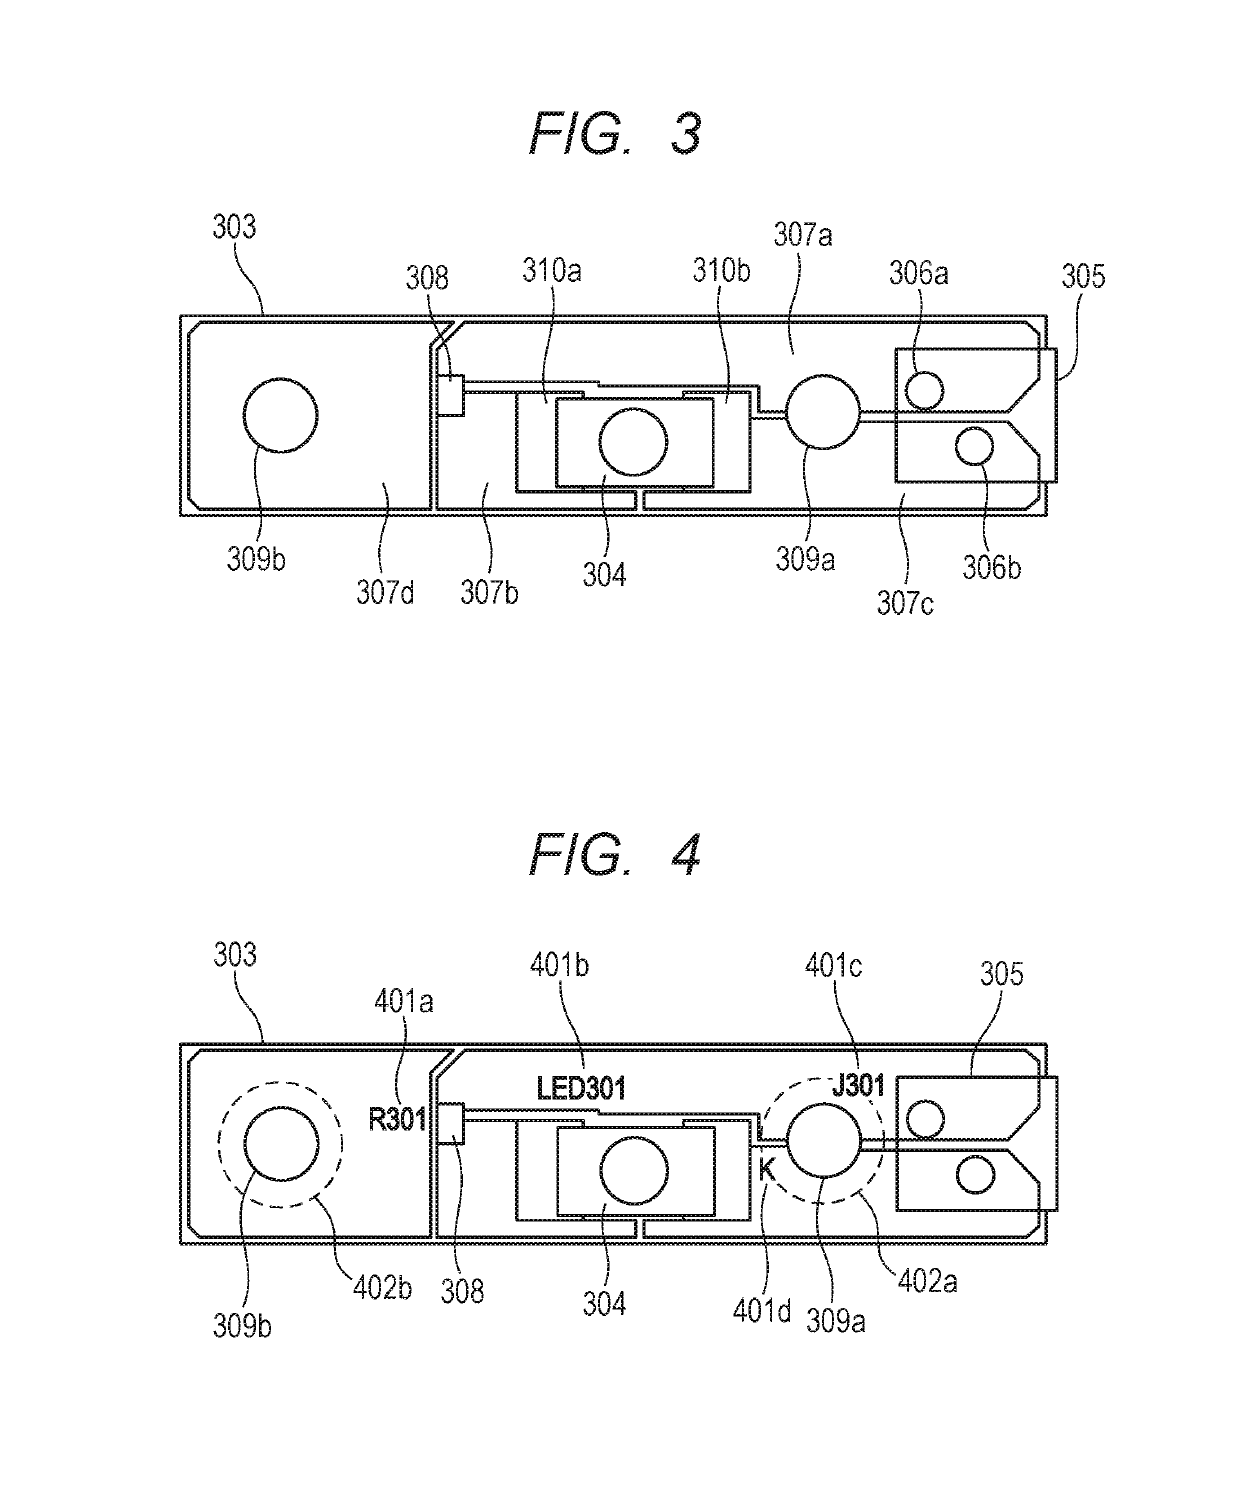 Circuit board and image forming apparatus